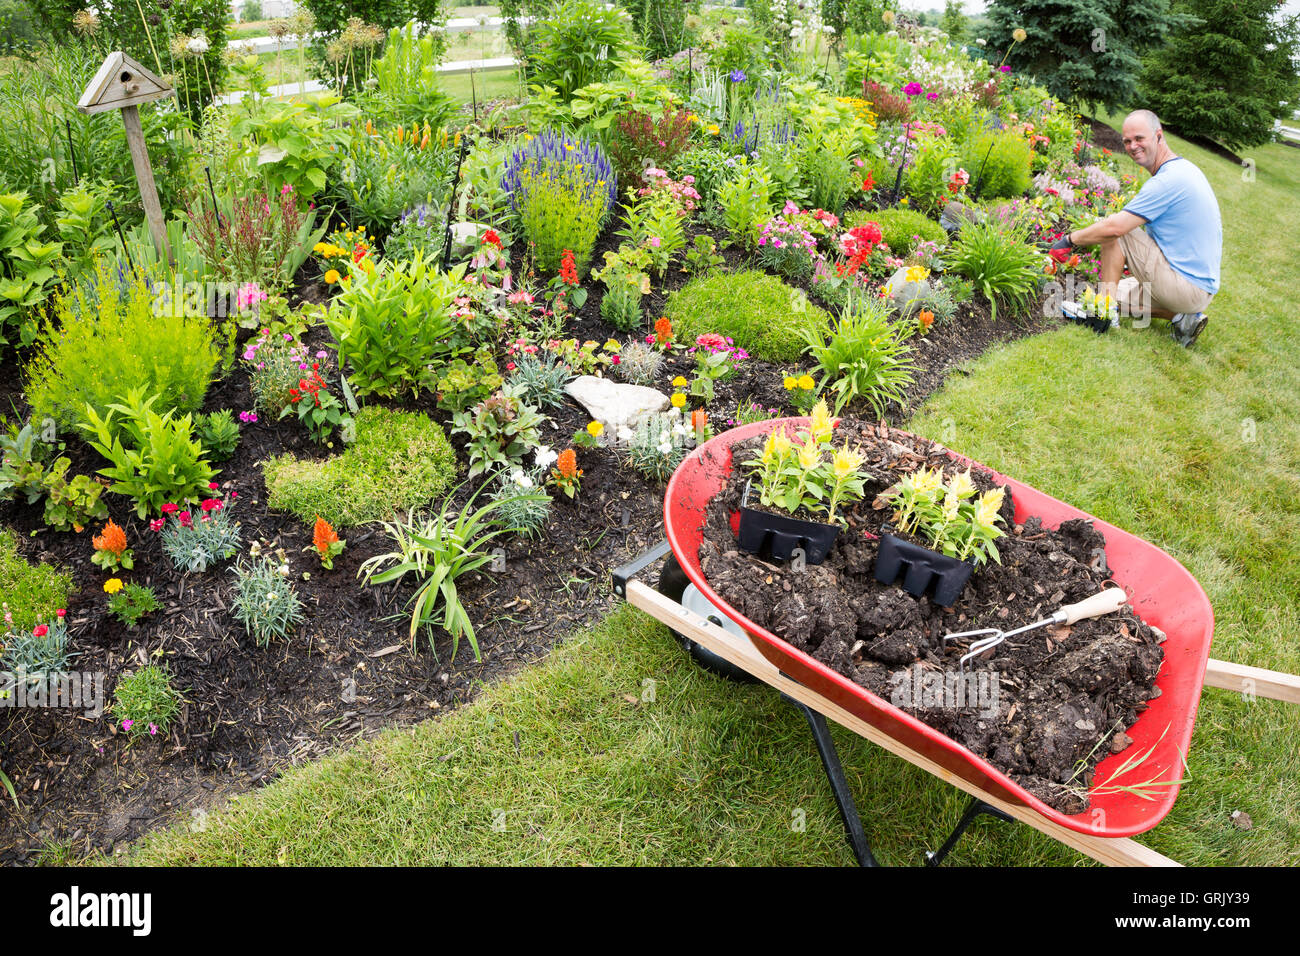 Man planting in the garden with gardening tools close by under the sun Stock Photo